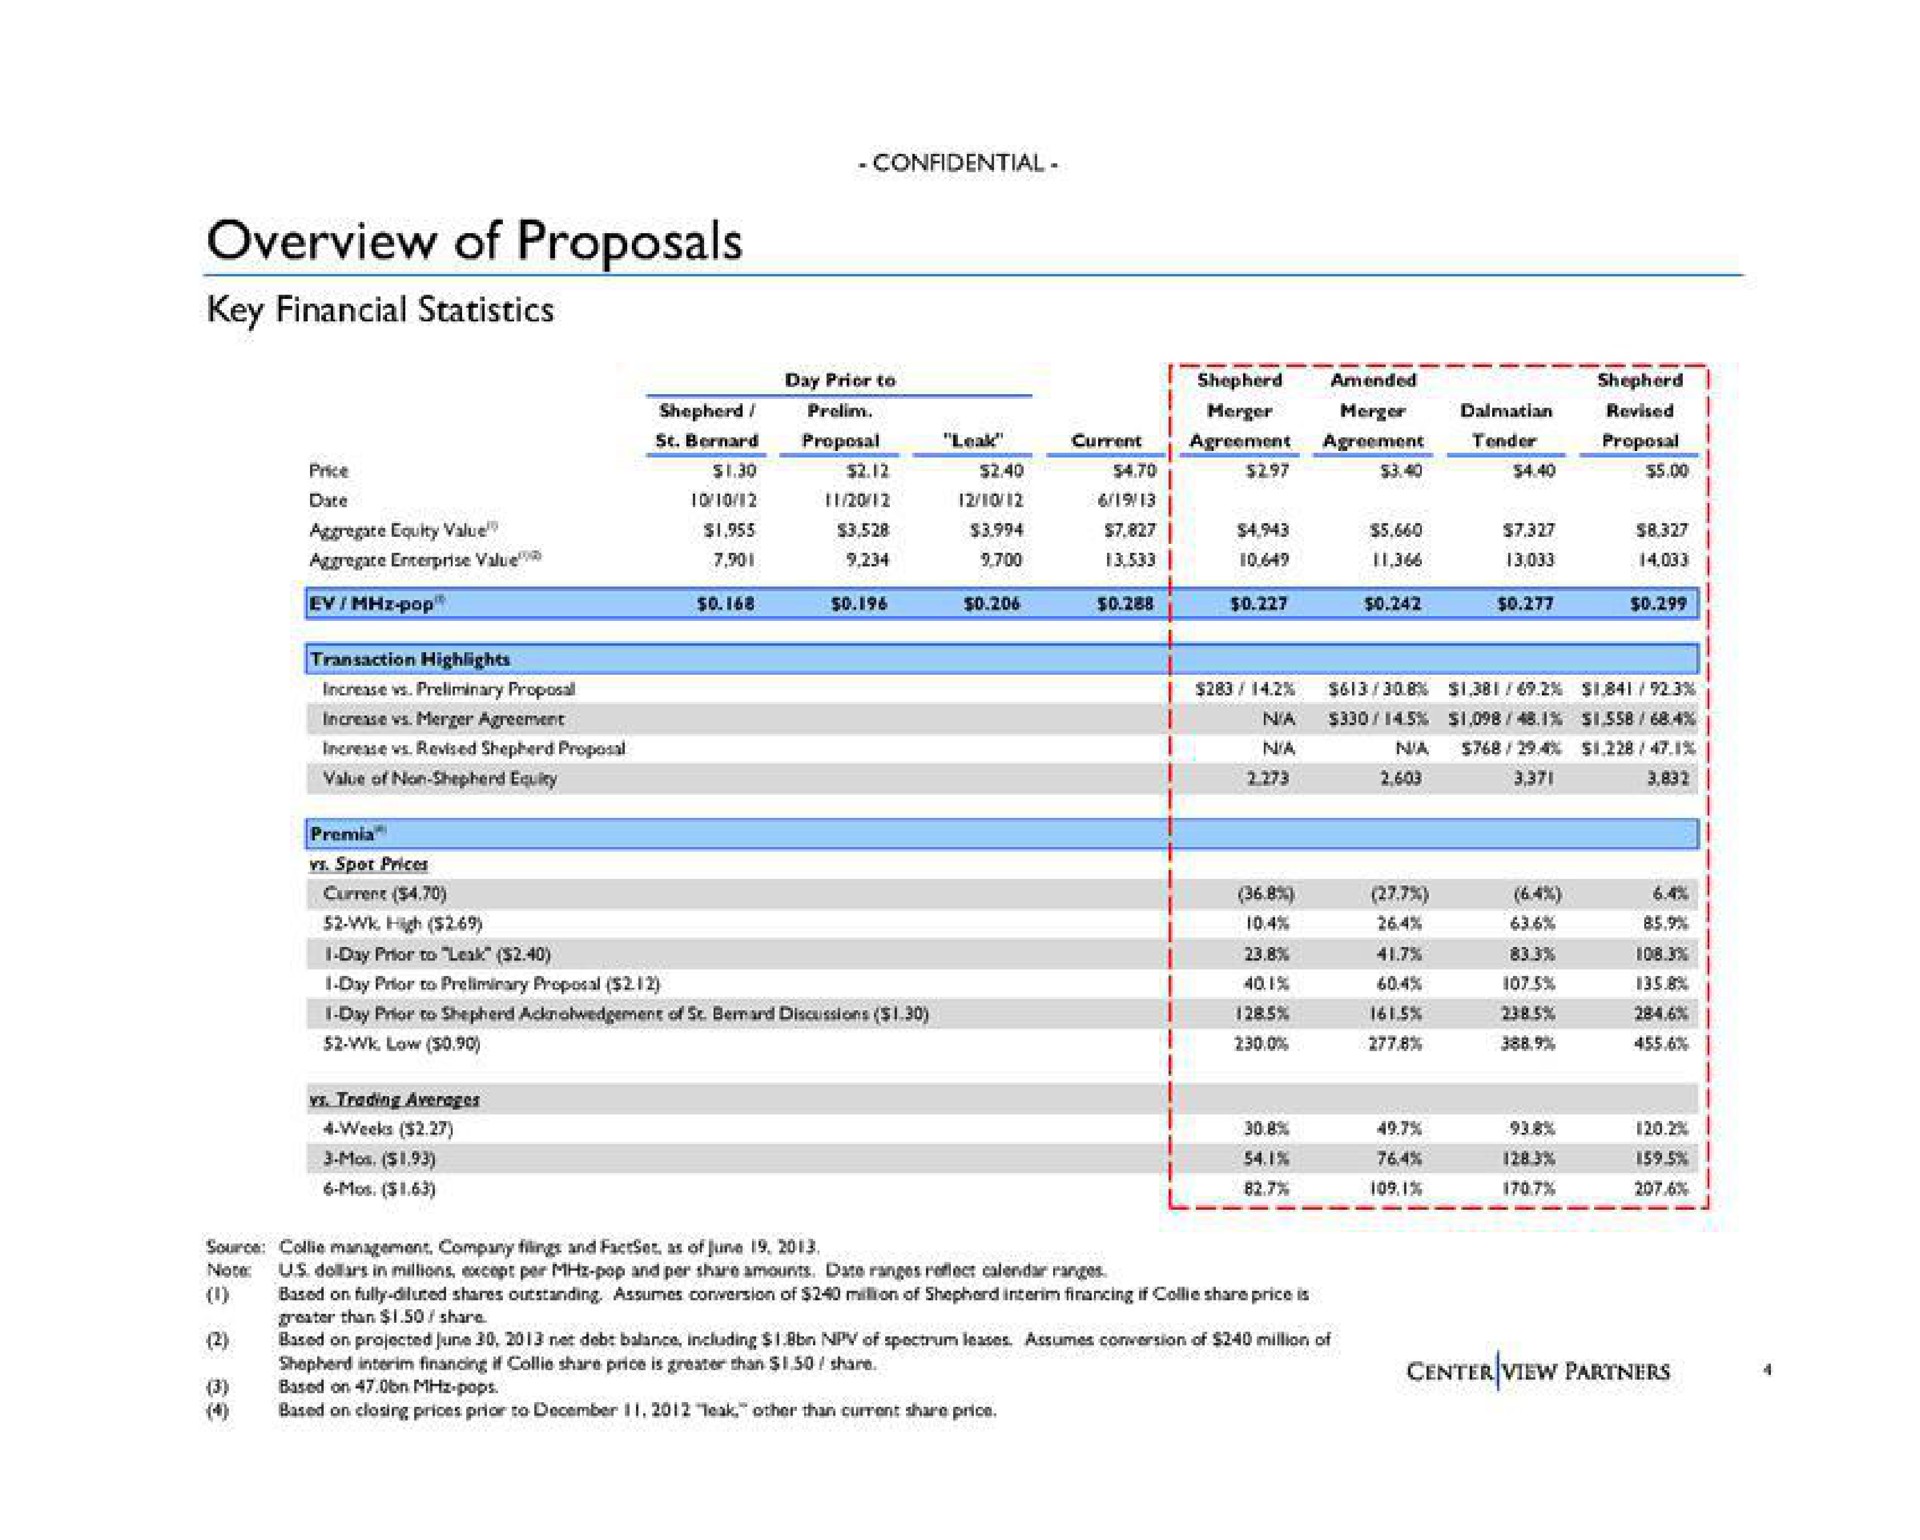 overview of proposals key financial statistics | Centerview Partners